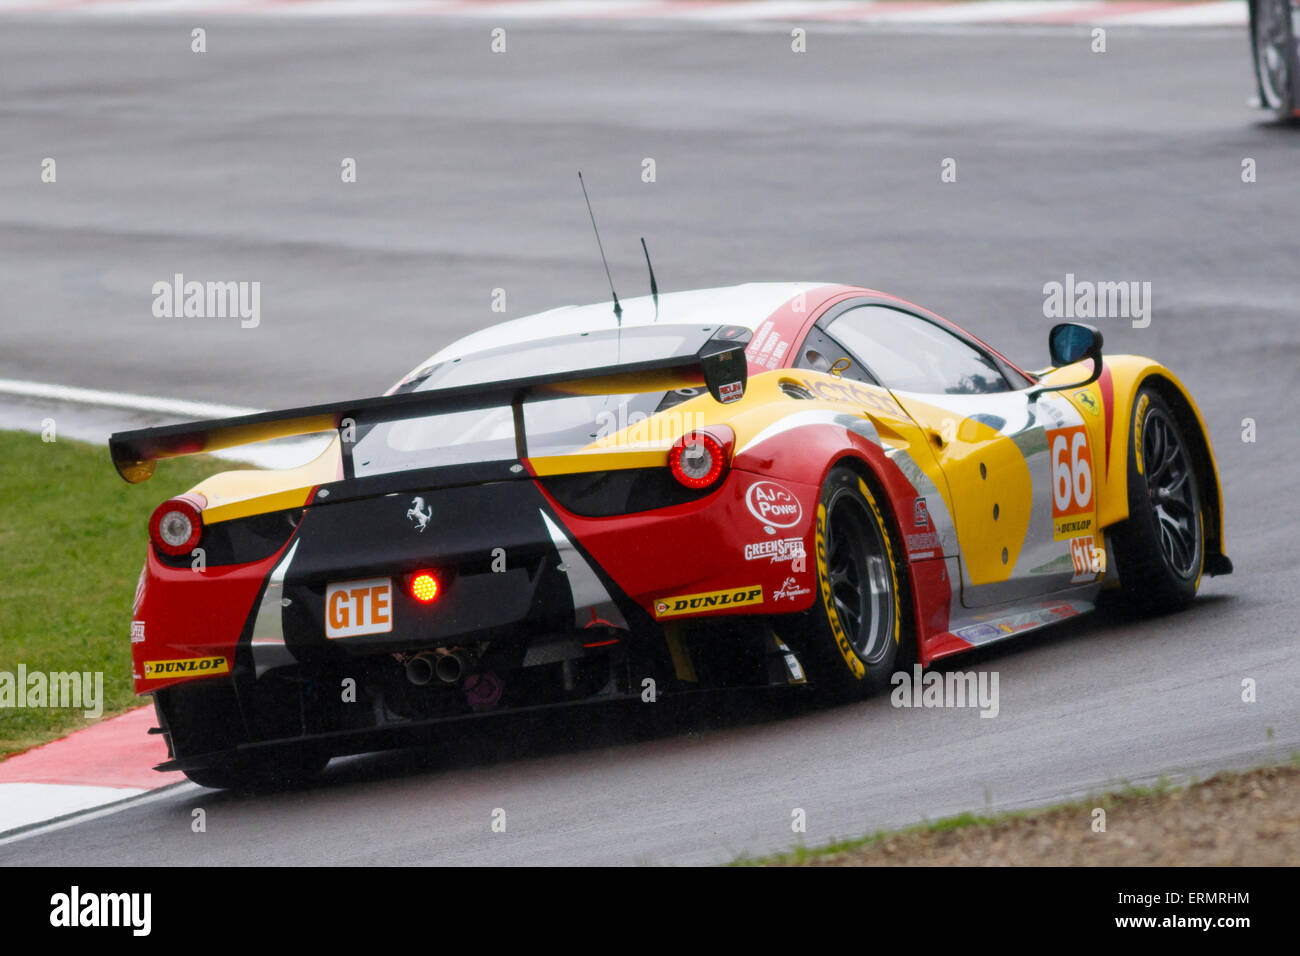 Imola, Italy – May 16, 2015: Ferrari F458 Italia of JMW MOTORSPORT Team in action during the European Le Mans Series - 4 Hours Stock Photo